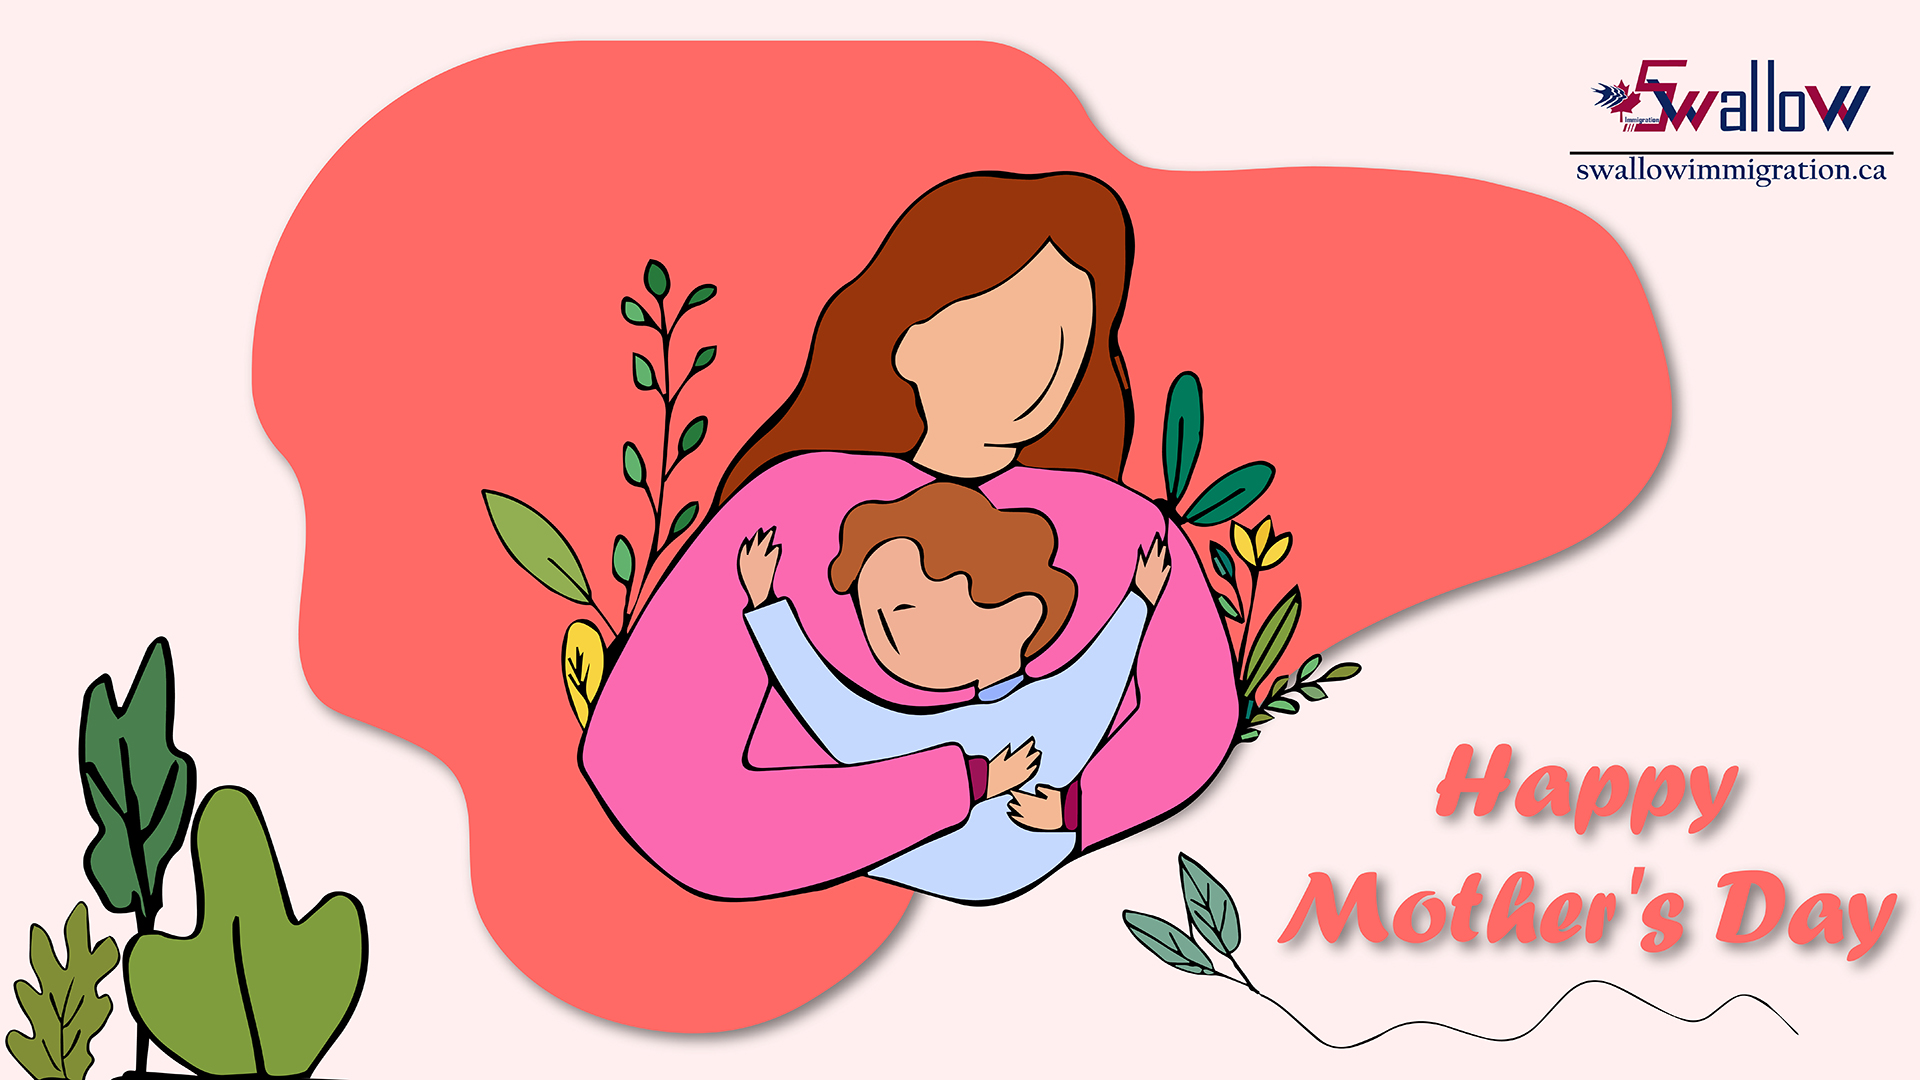 Happy Mother's Day to all the wonderful ladies from Swallow Immigration Consultancy Inc.